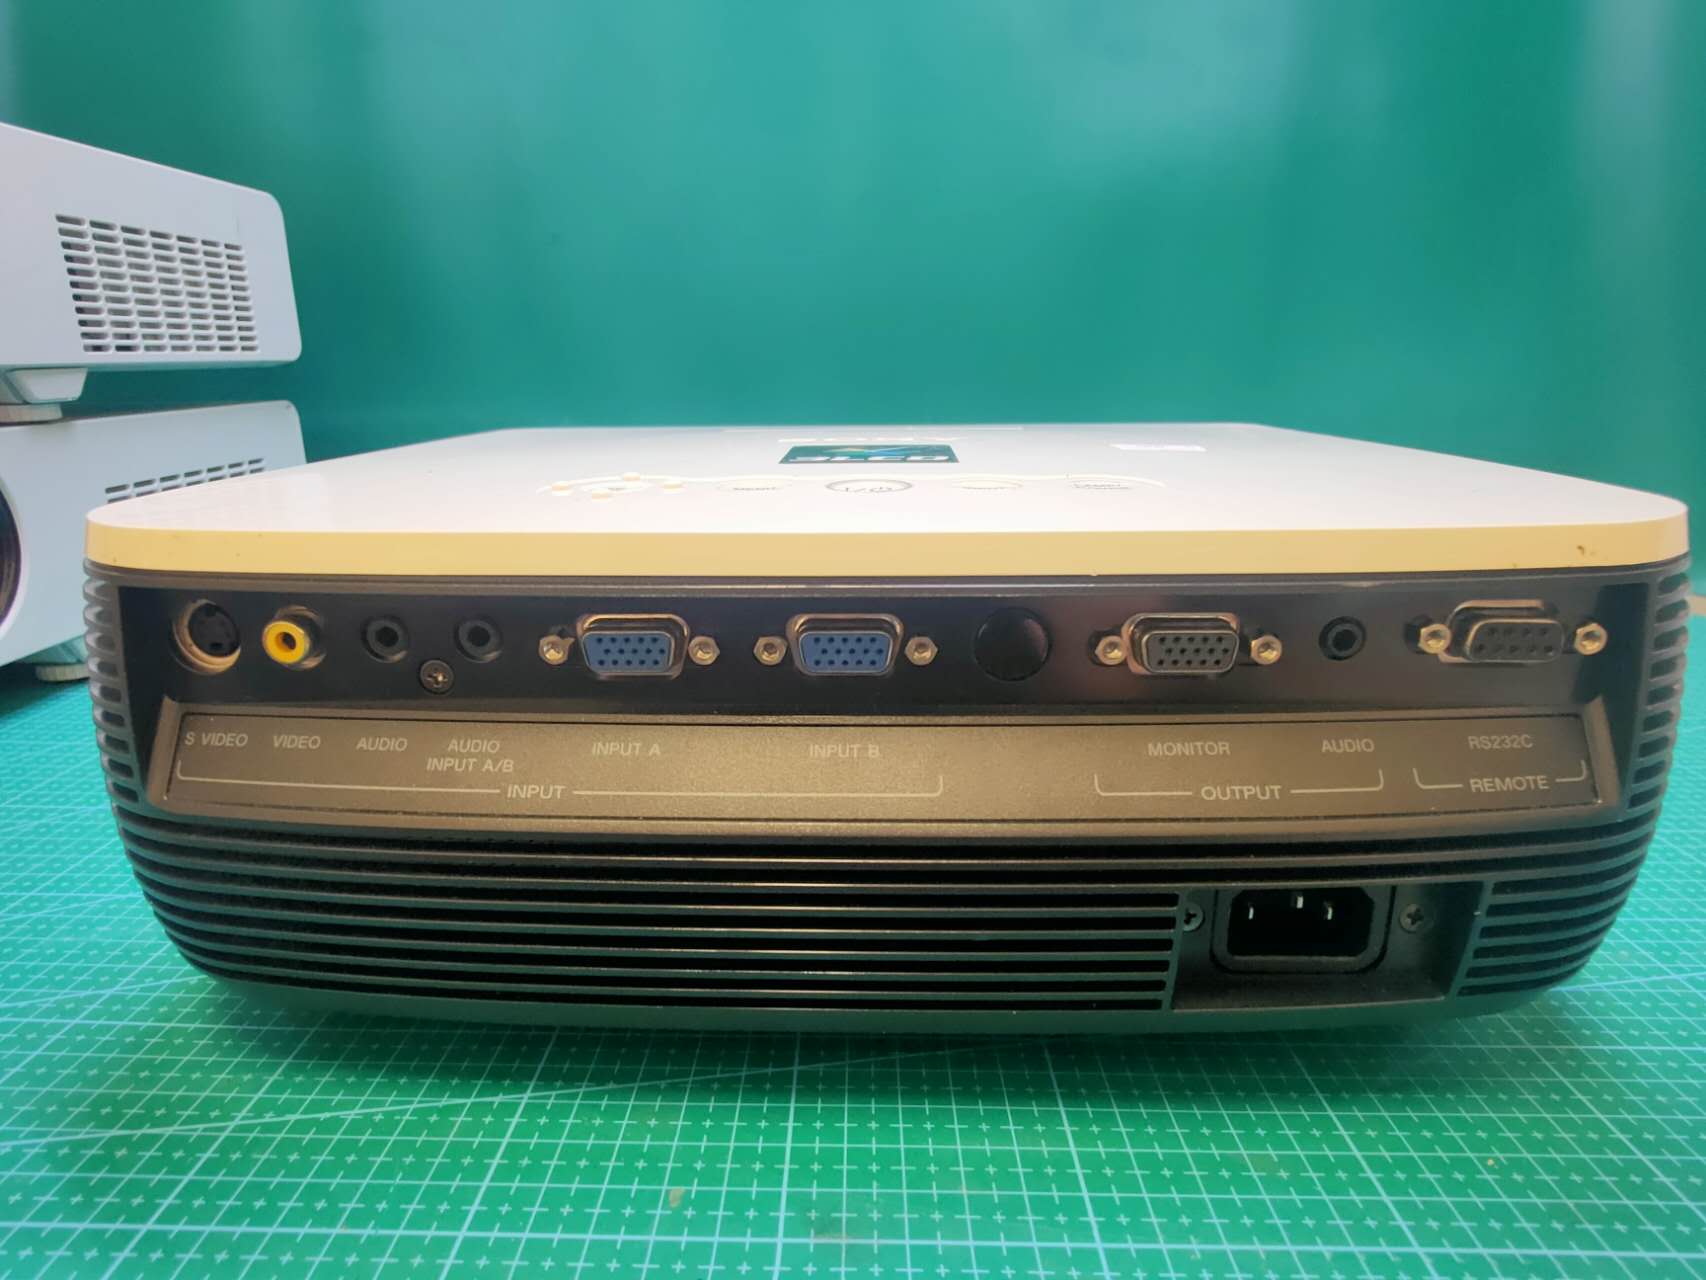 Projector Sony VPL-EX4 For Home Use Projectors